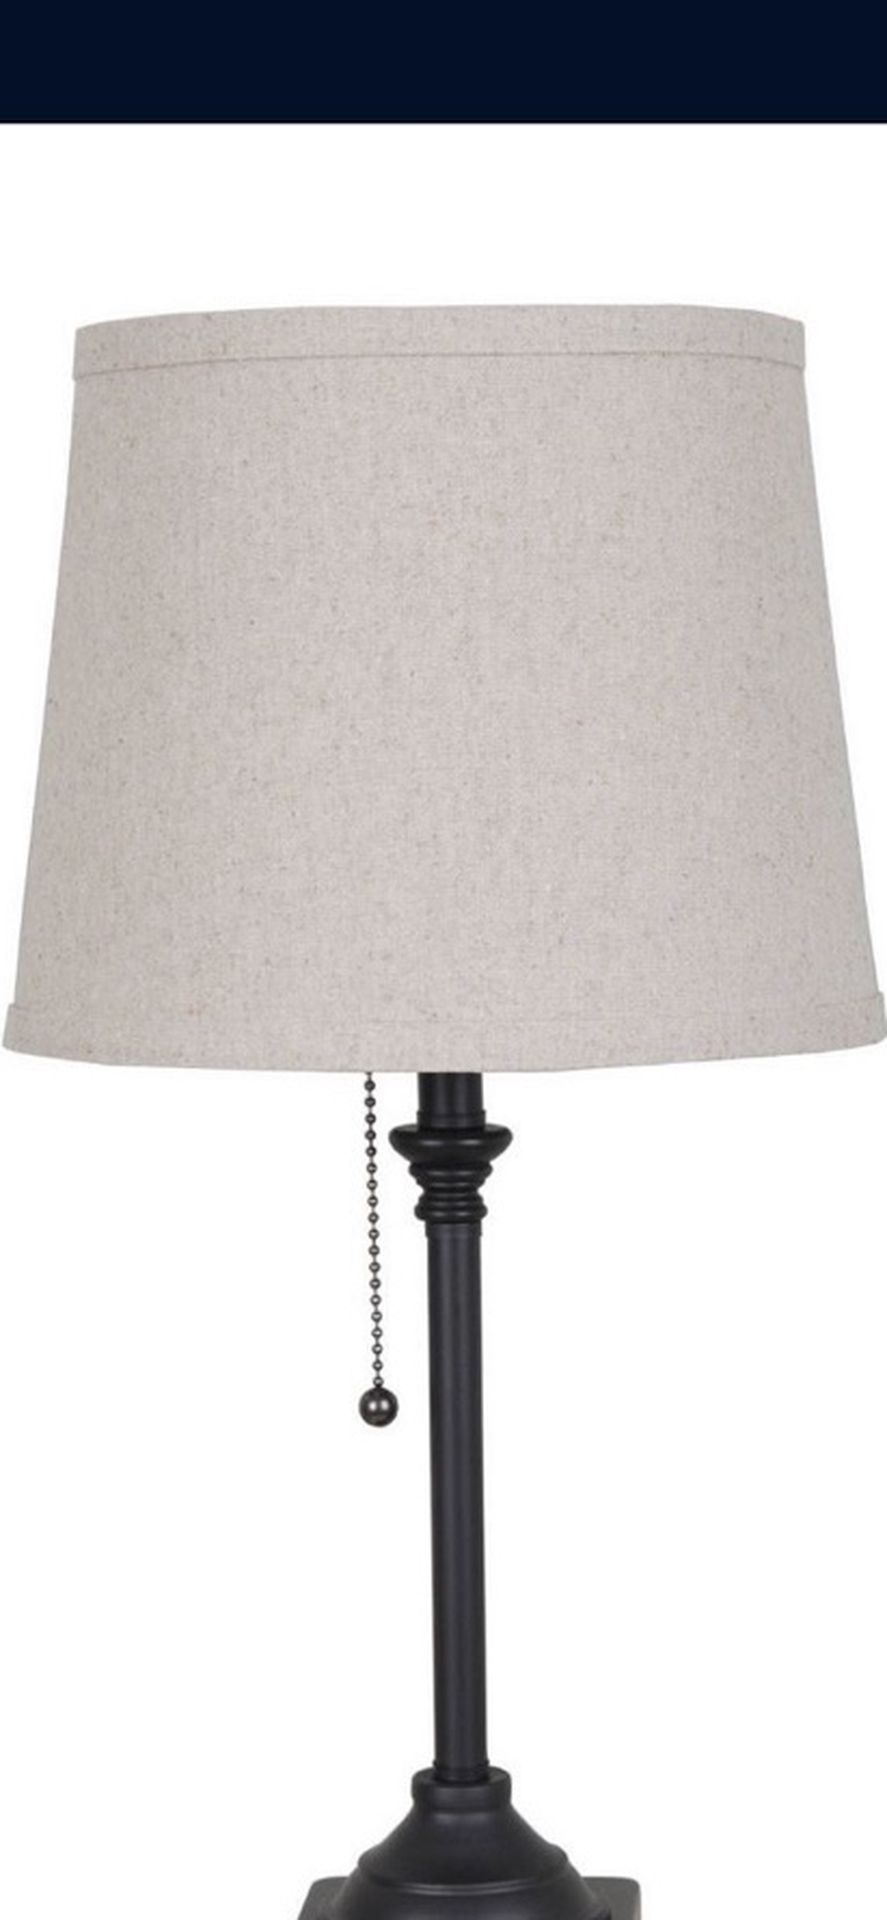 Lamp with pull chain included $15